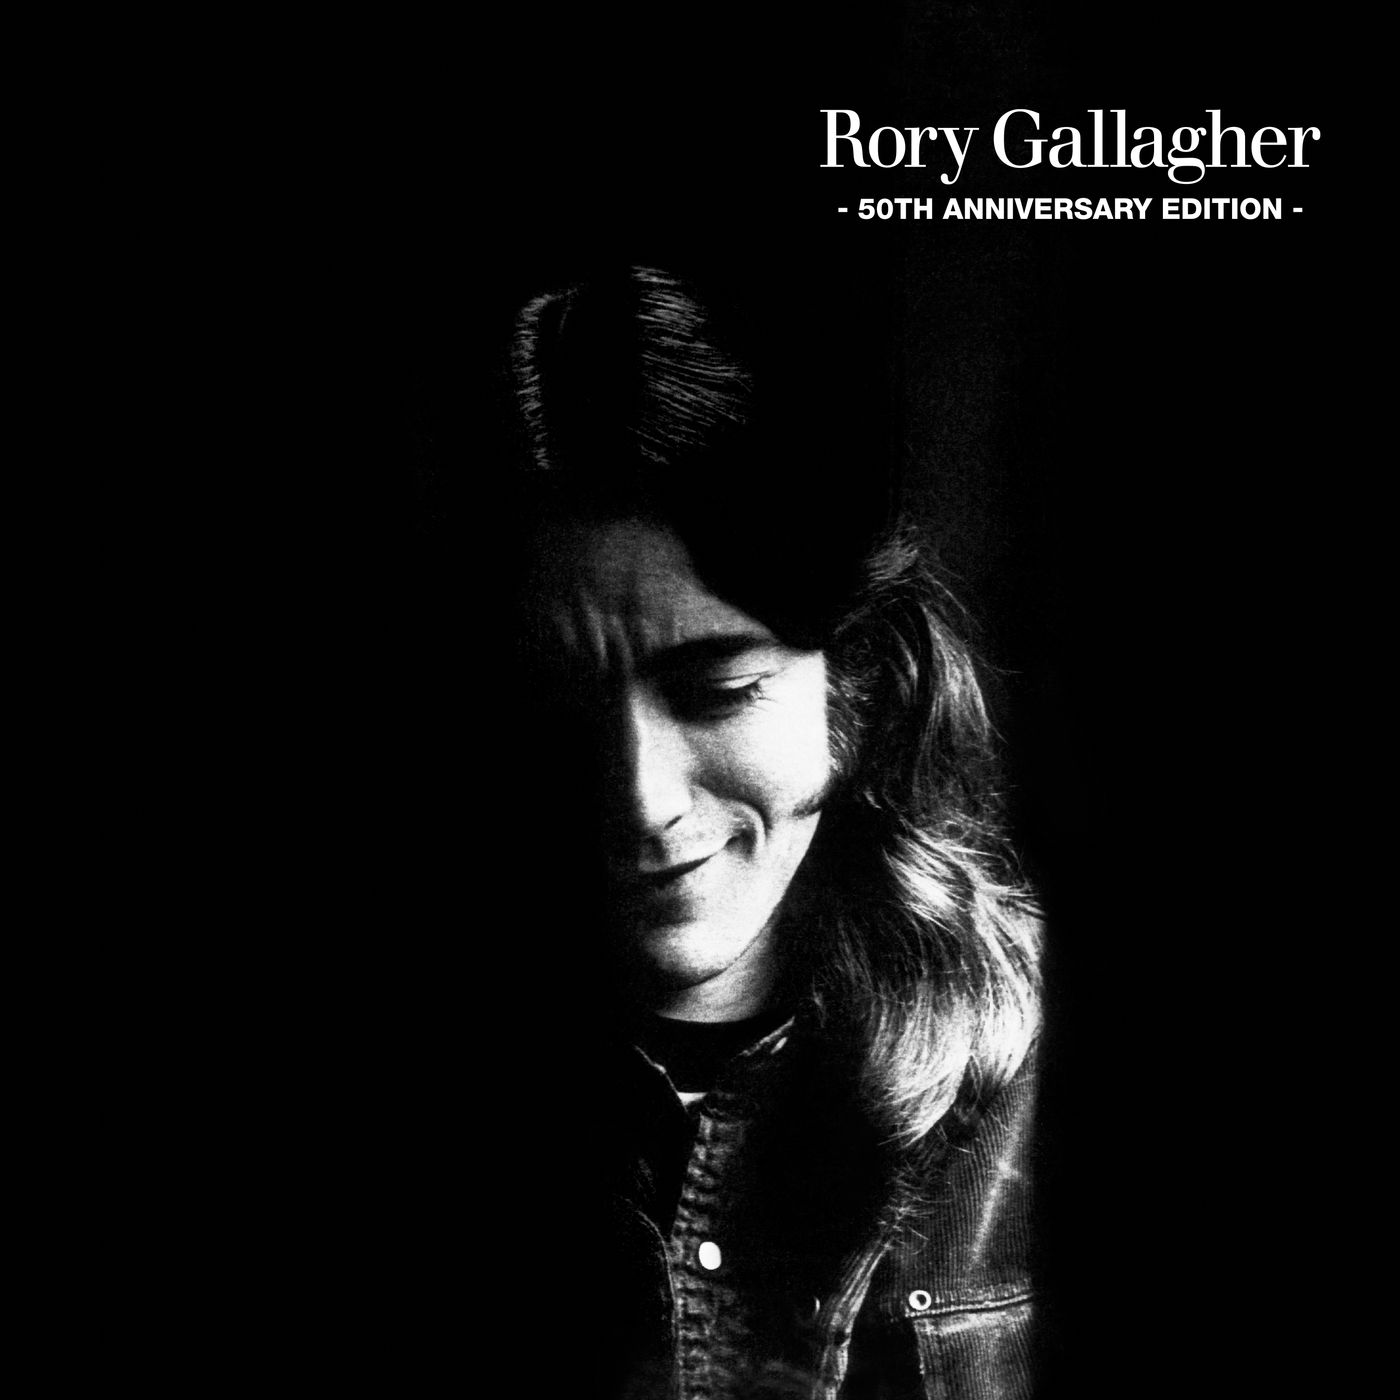 Rory Gallagher - Rory Gallagher (50th Anniversary Edition) (1971/2021) [FLAC 24bit/96kHz]